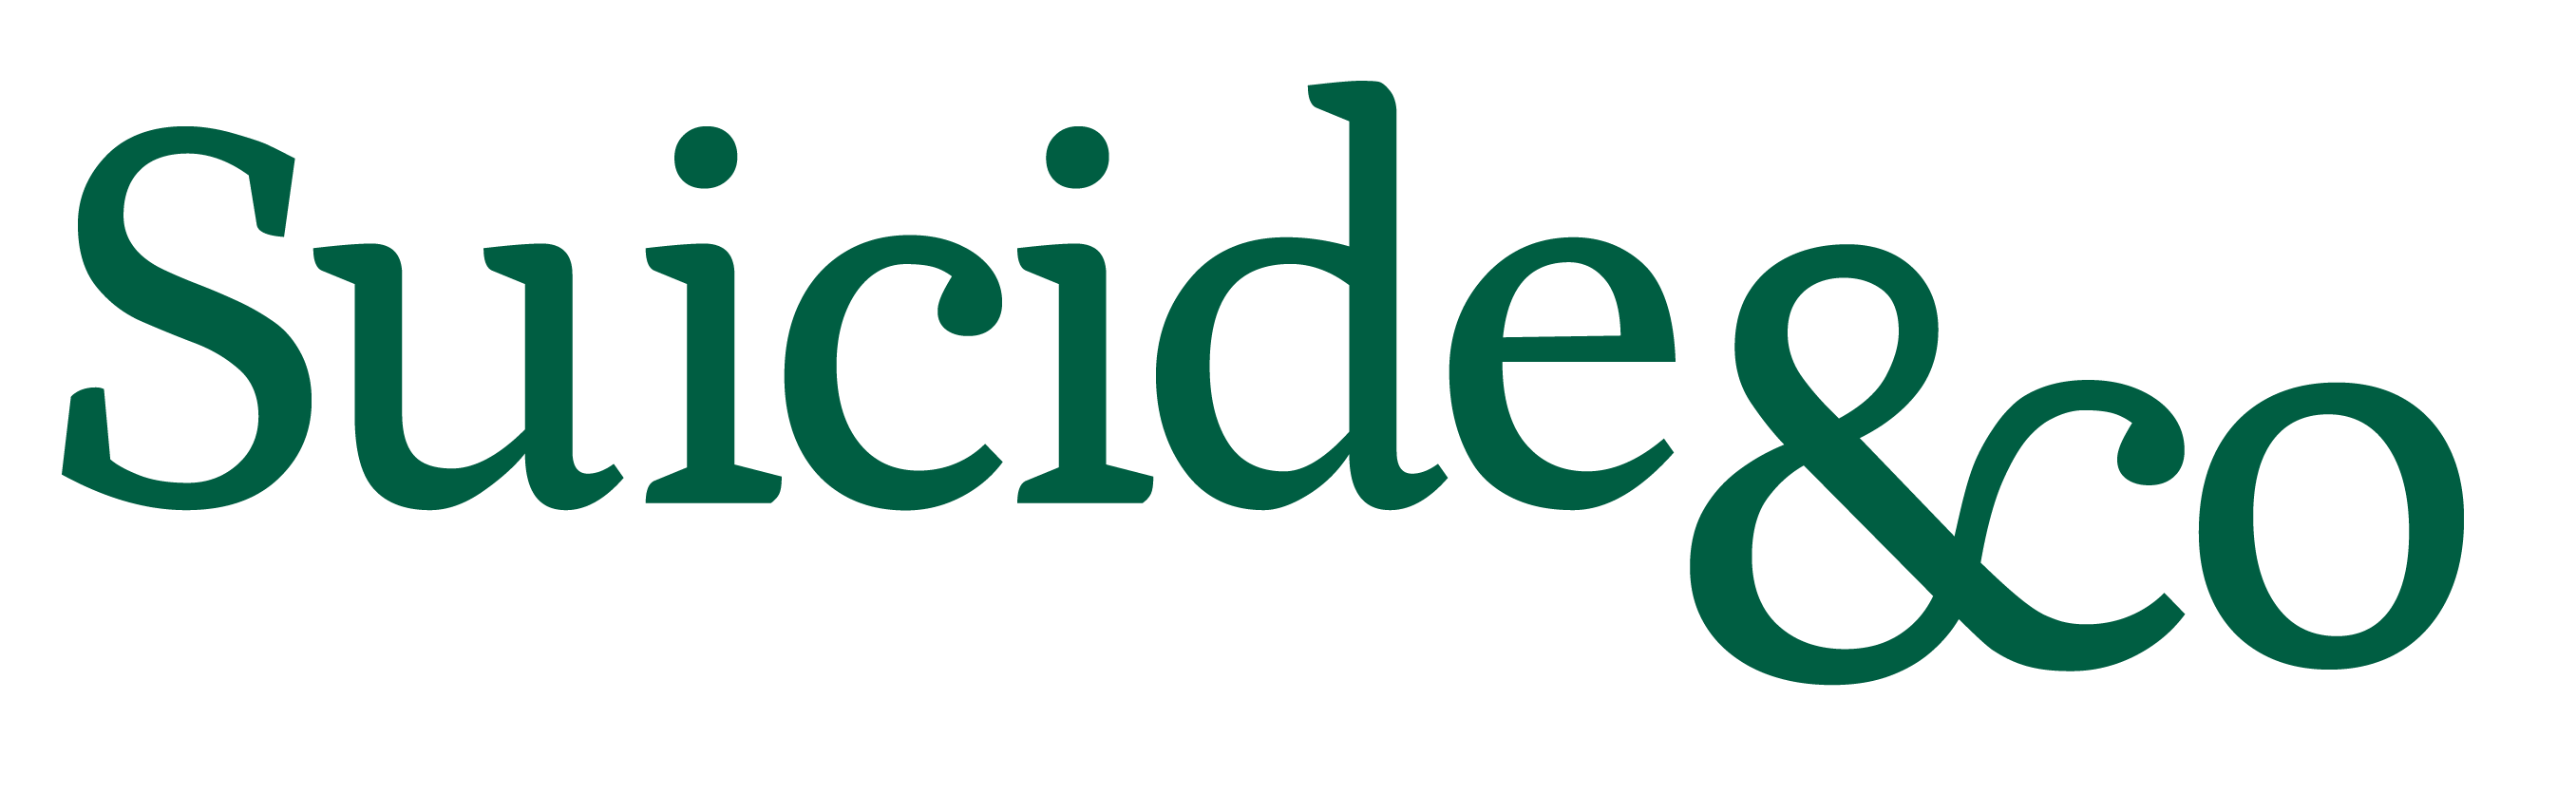 Suicide and Co logo